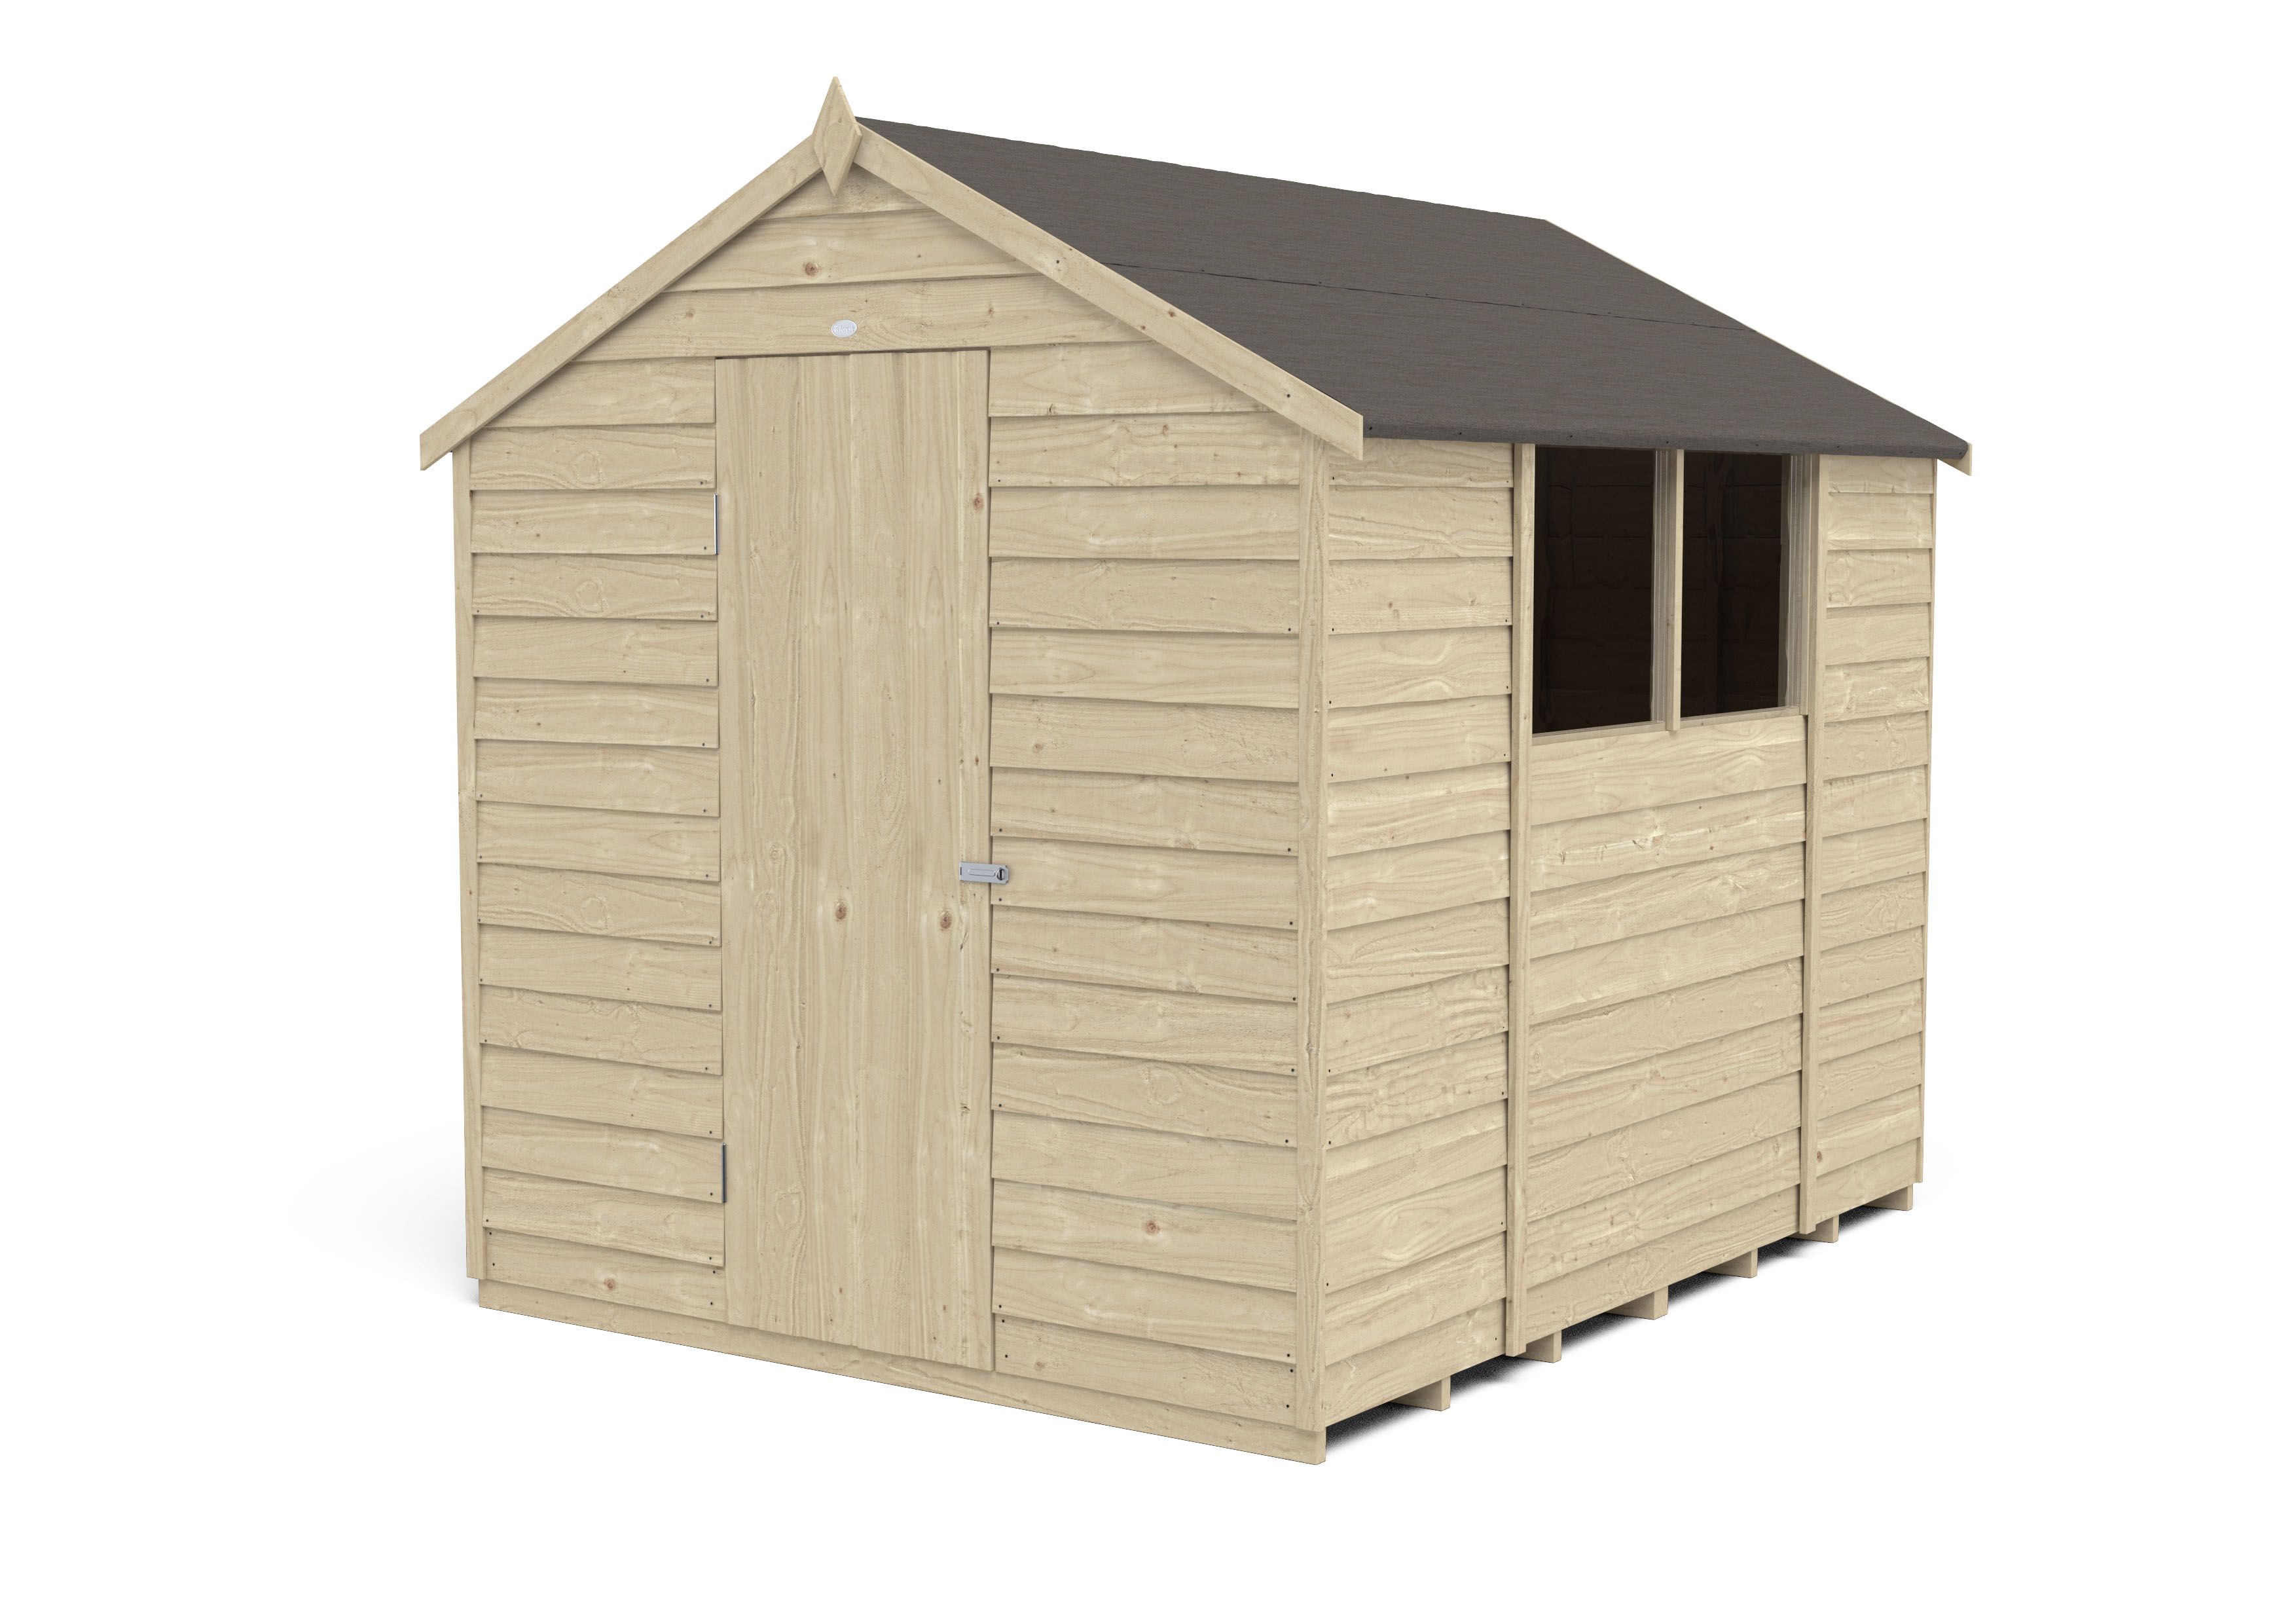 Forest Garden Overlap 8x6 ft Apex Wooden Pressure treated Shed with floor & 2 windows - Assembly service included